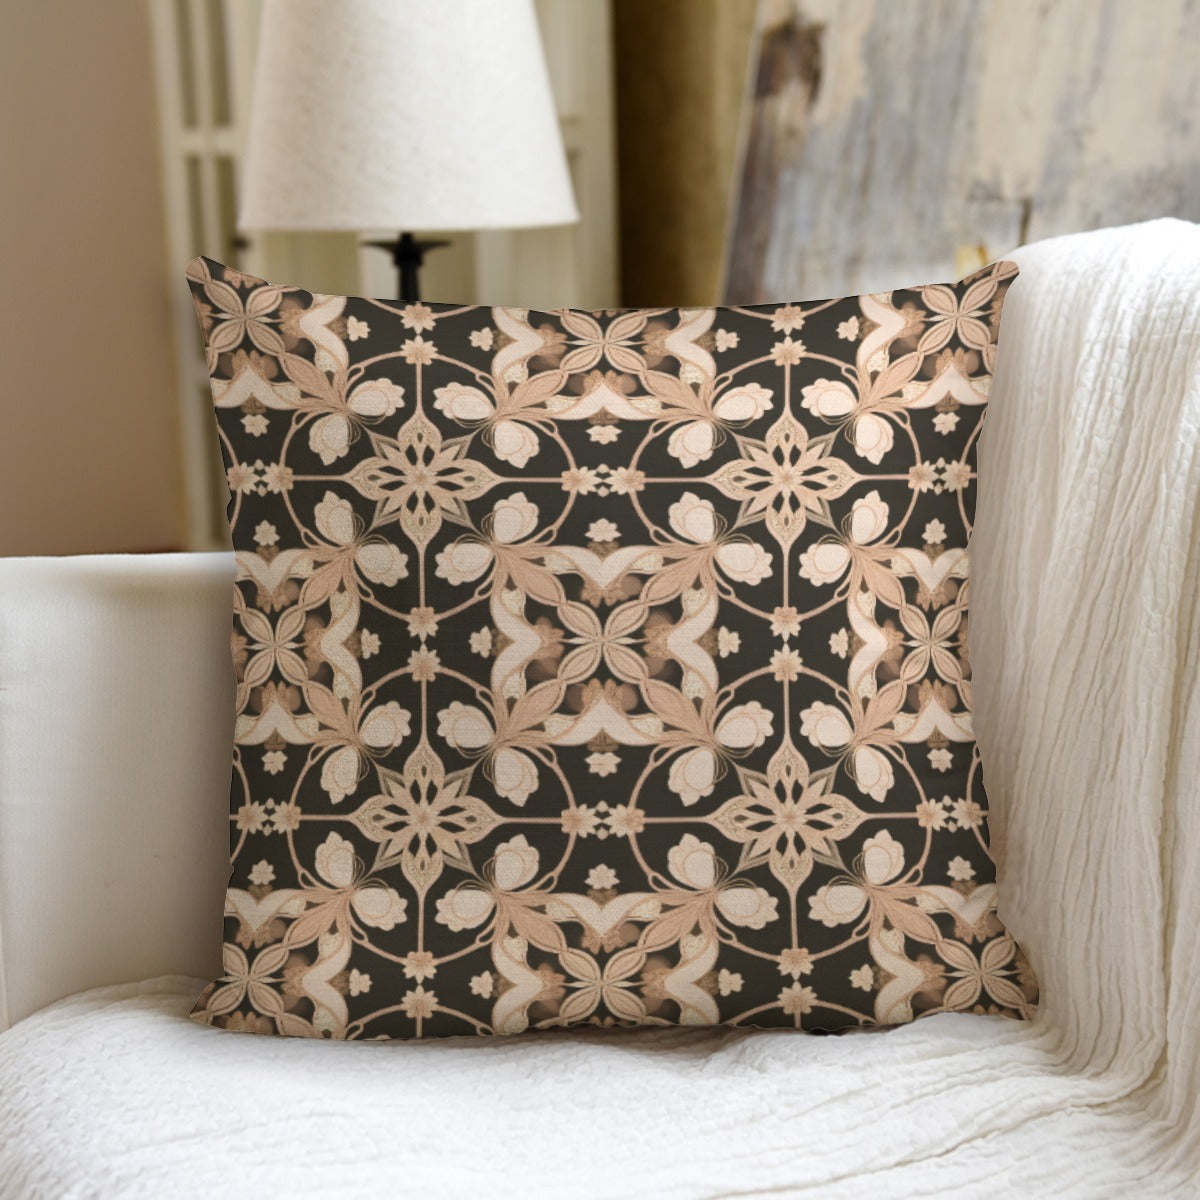 AC BAROQUE pillow with pillow Inserts